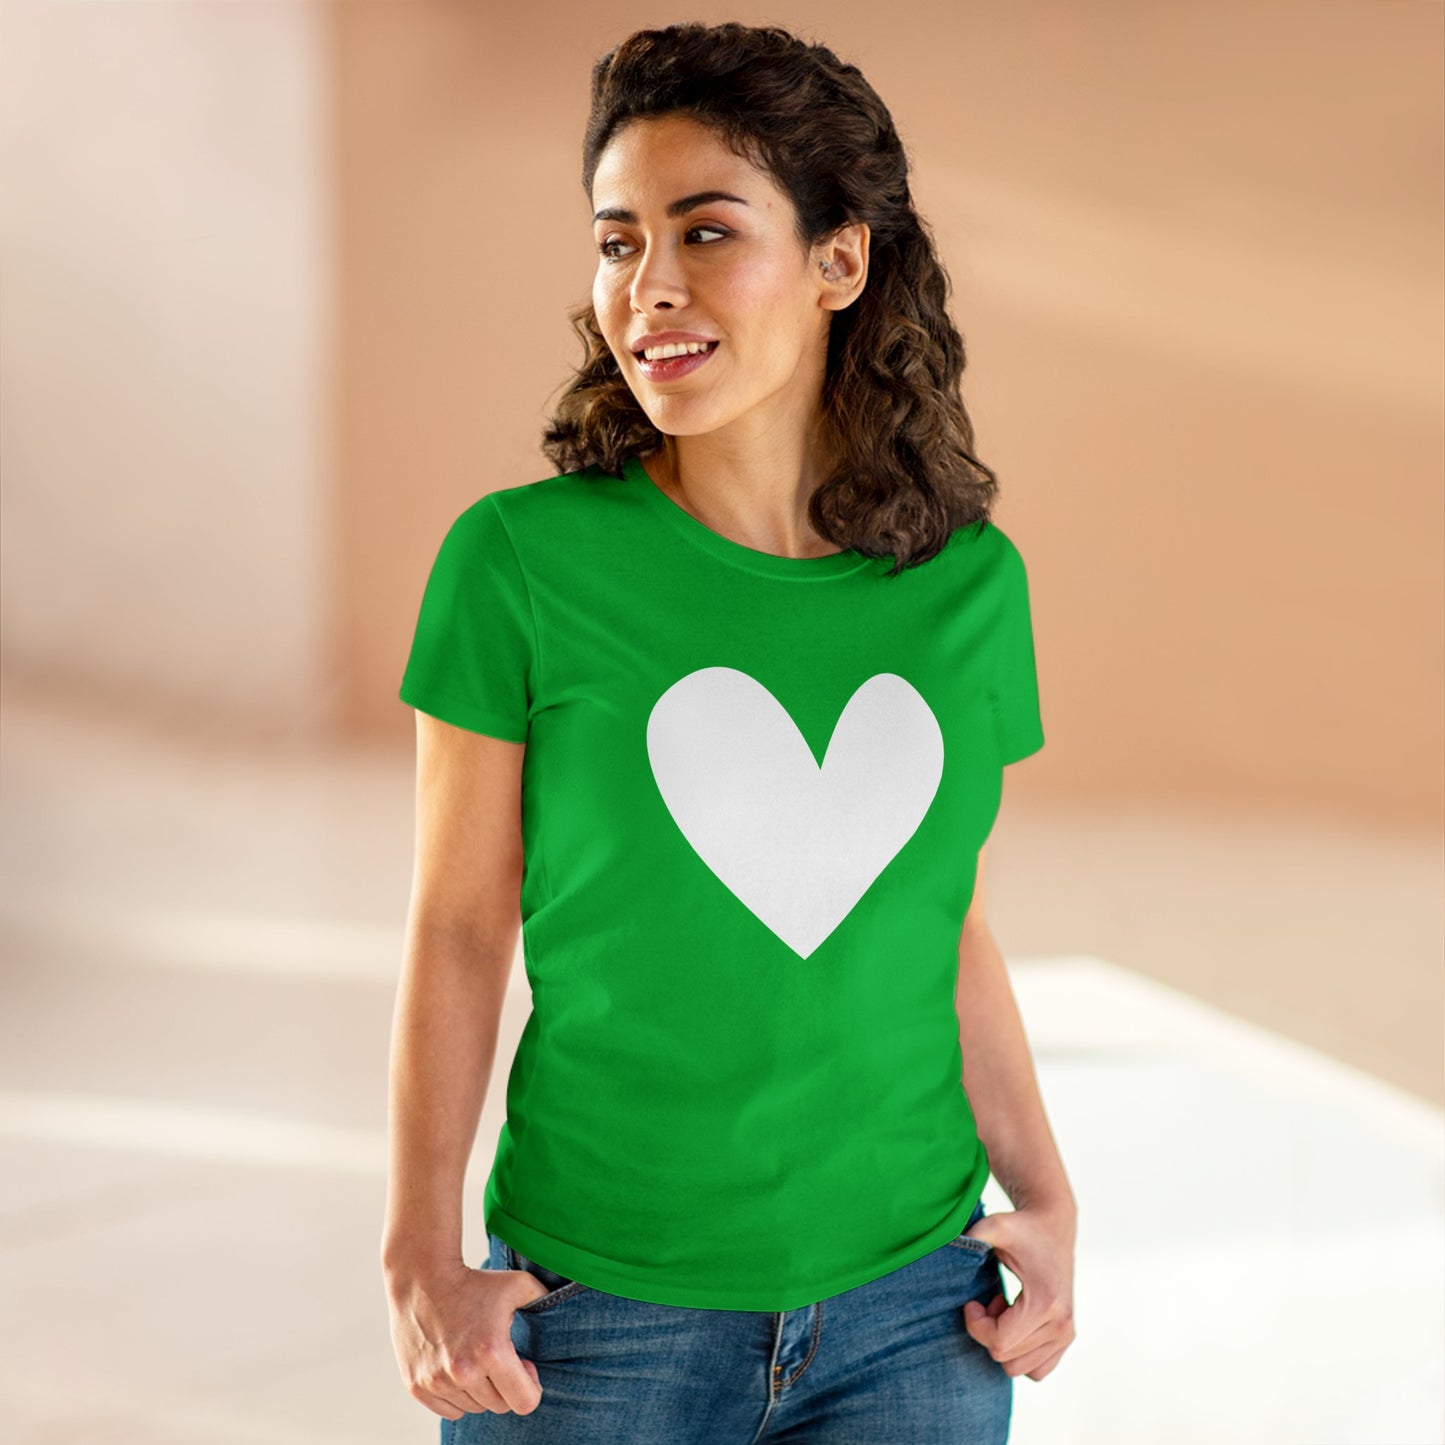 Bold Heart Tee - 100% Cotton Semi-Fitted T-Shirt with Bold Heart Design